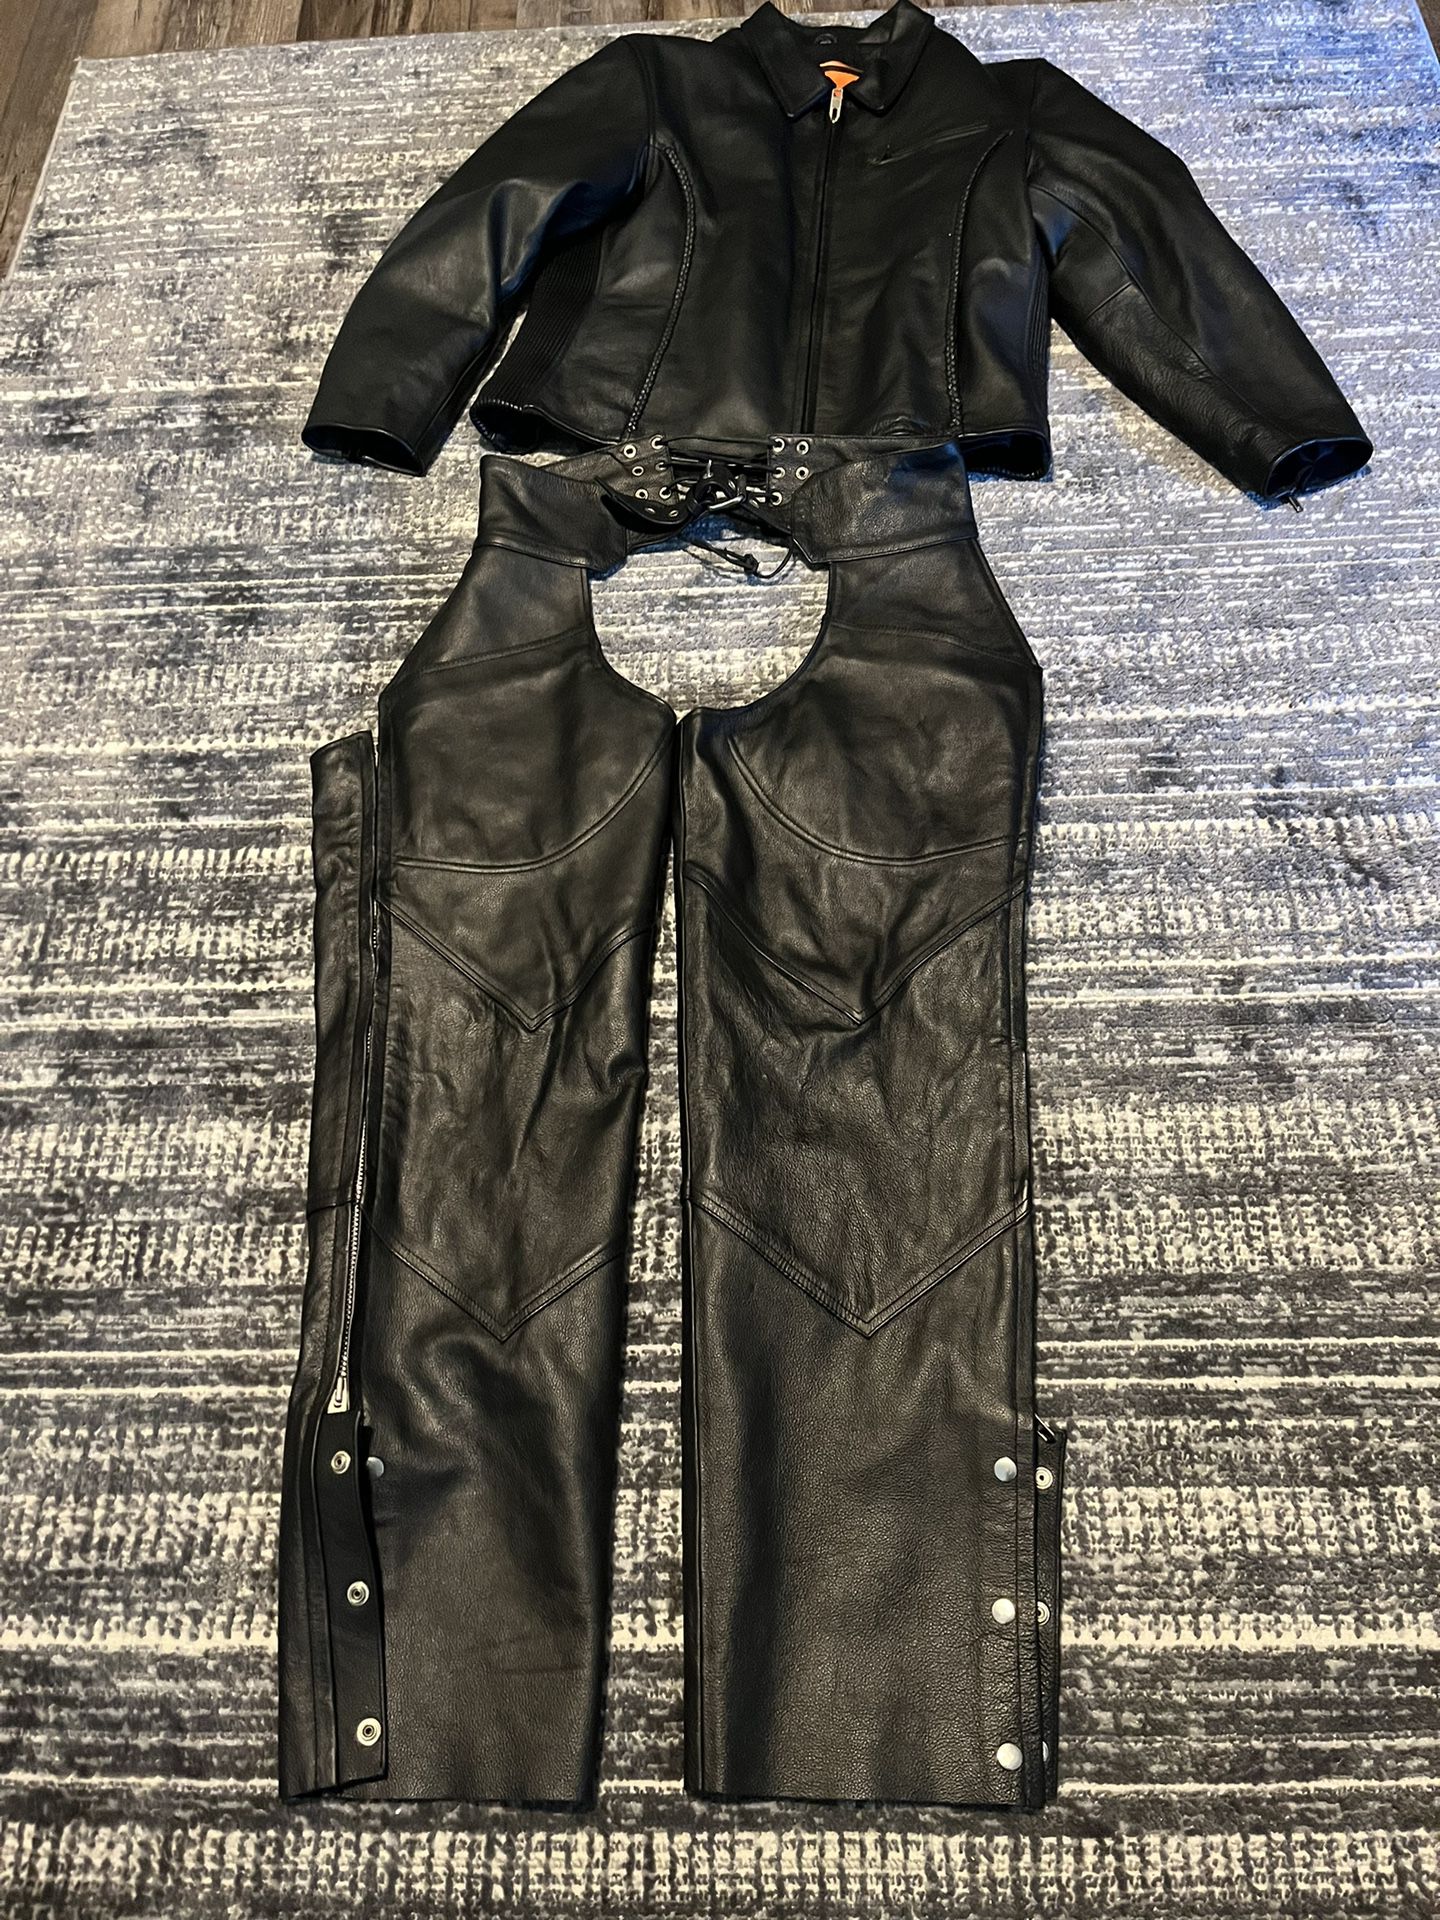 Woman’s Leather Motorcycle Jacket And Chaps